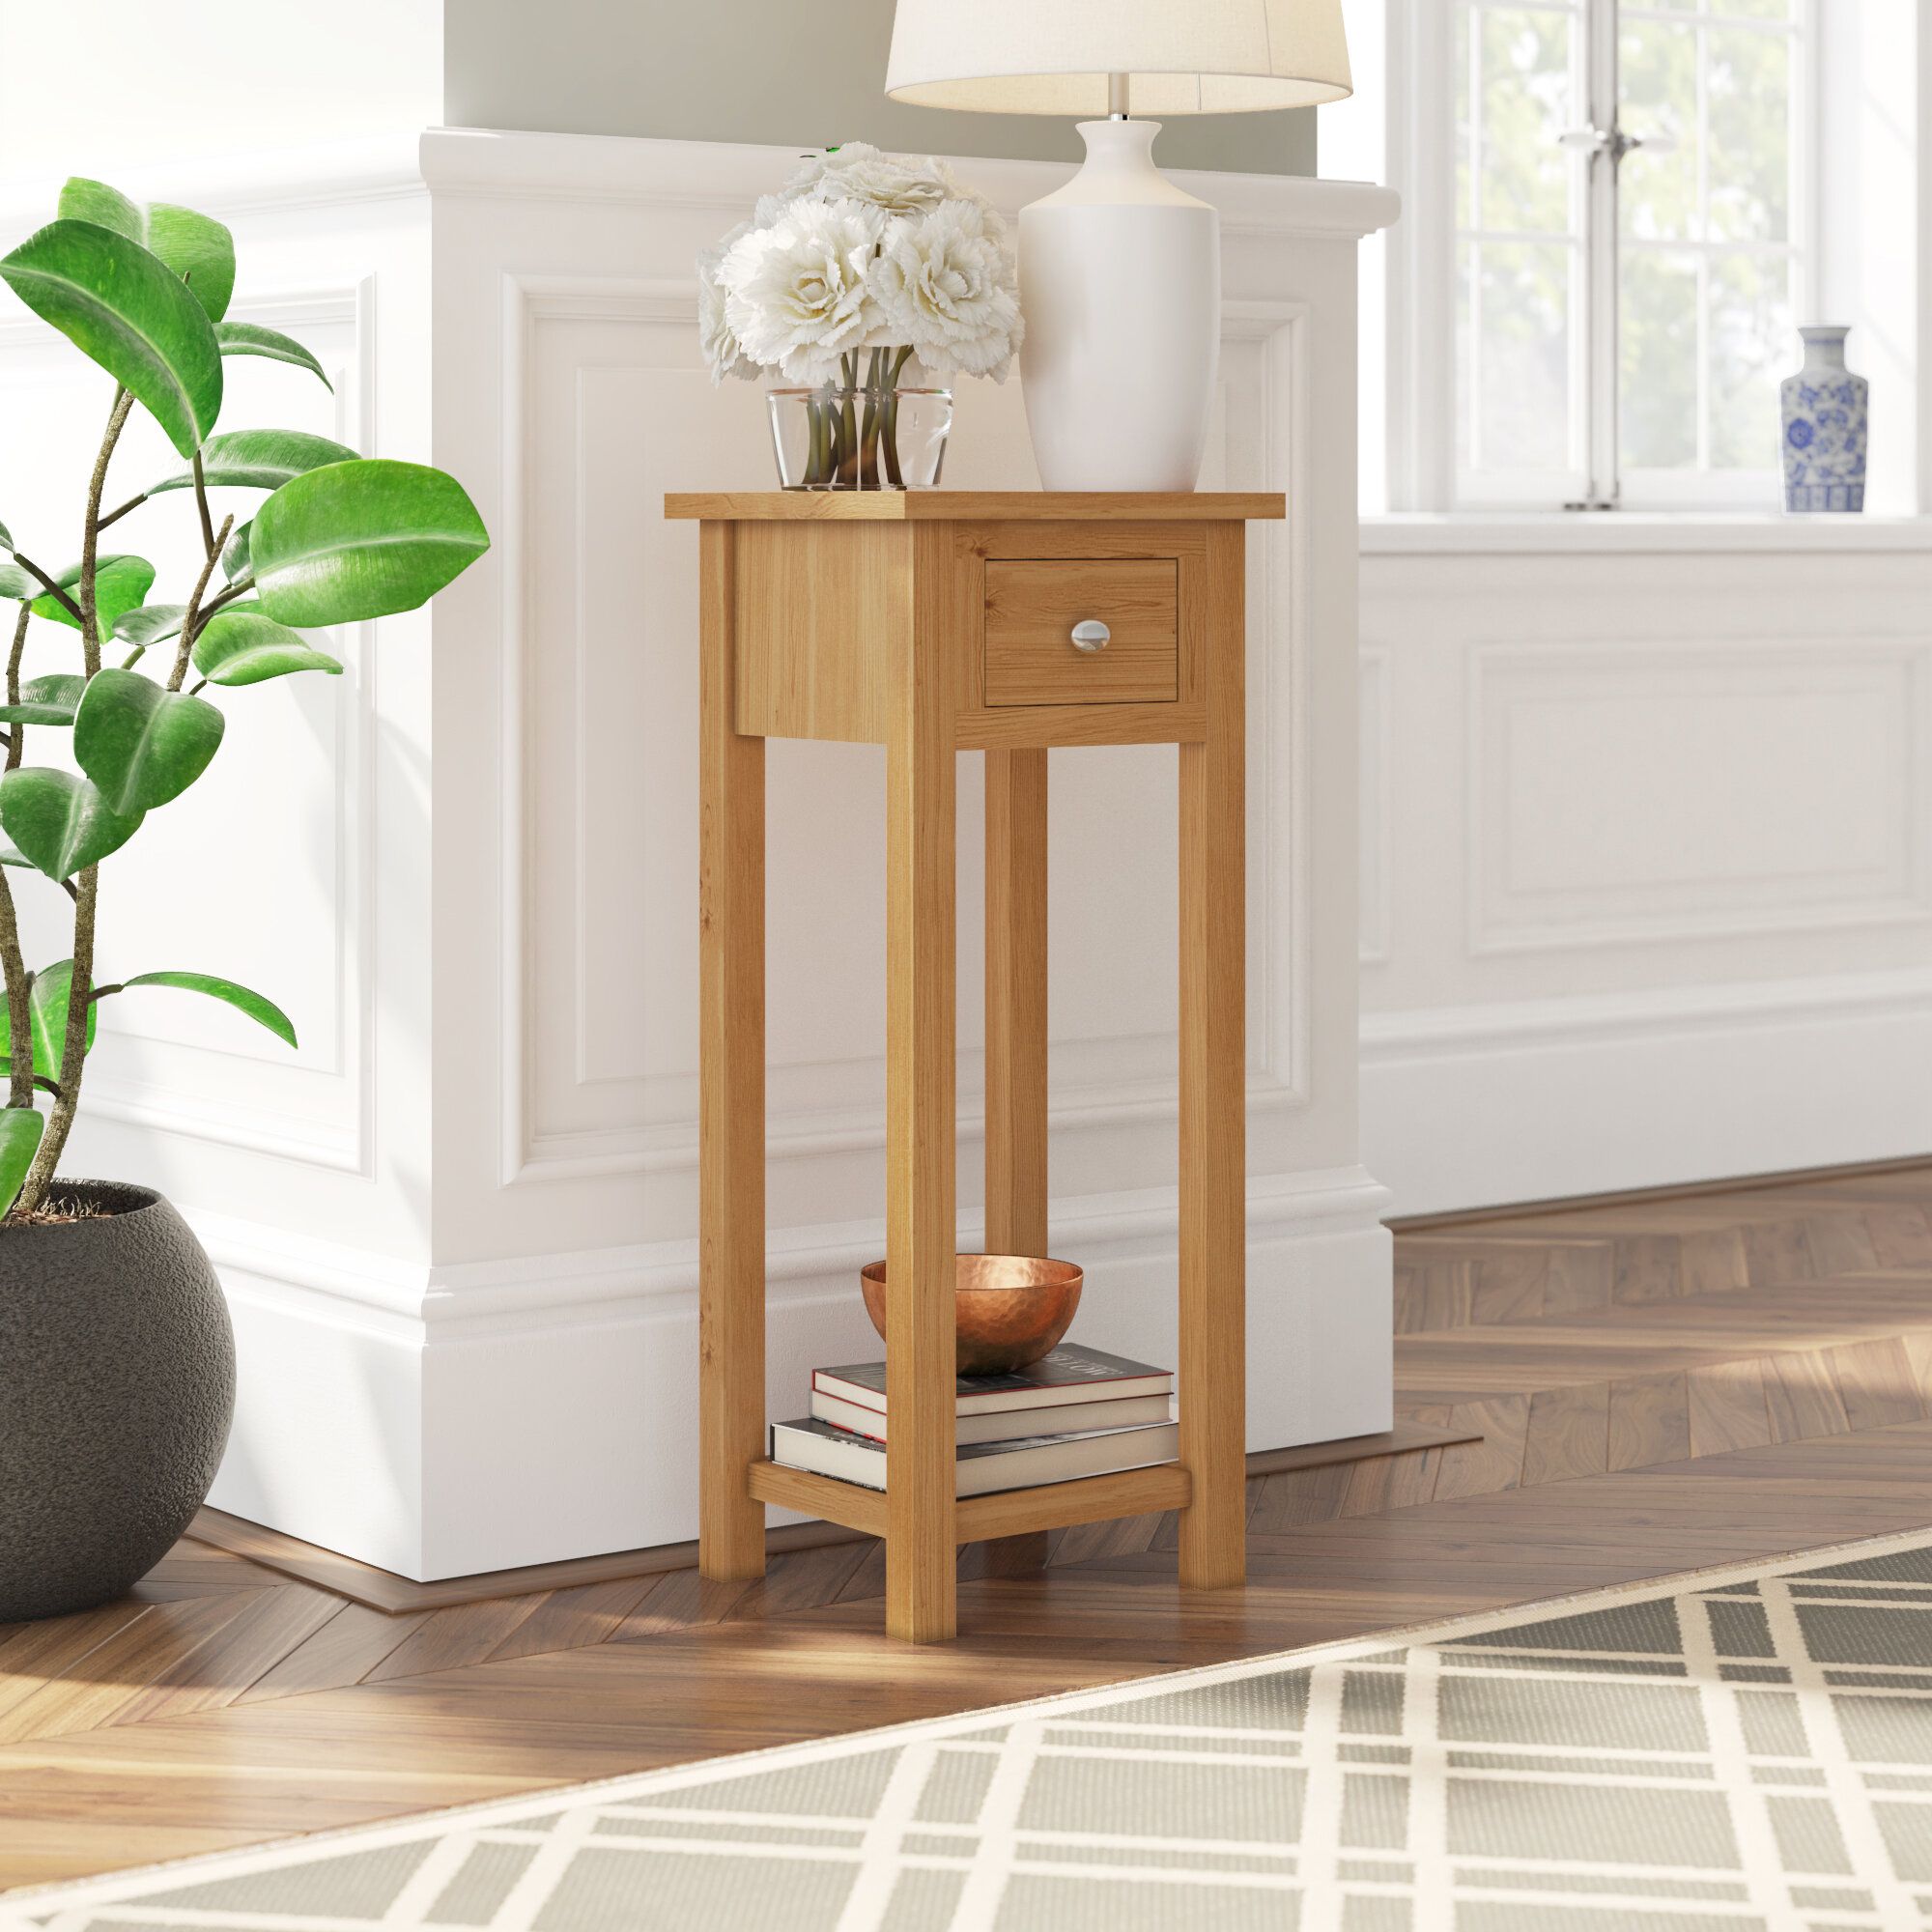 Foundstone Whitney Rectangular Pedestal Oak Plant Stand & Reviews |  Wayfair.co.uk With Regard To Oak Plant Stands (Photo 4 of 15)